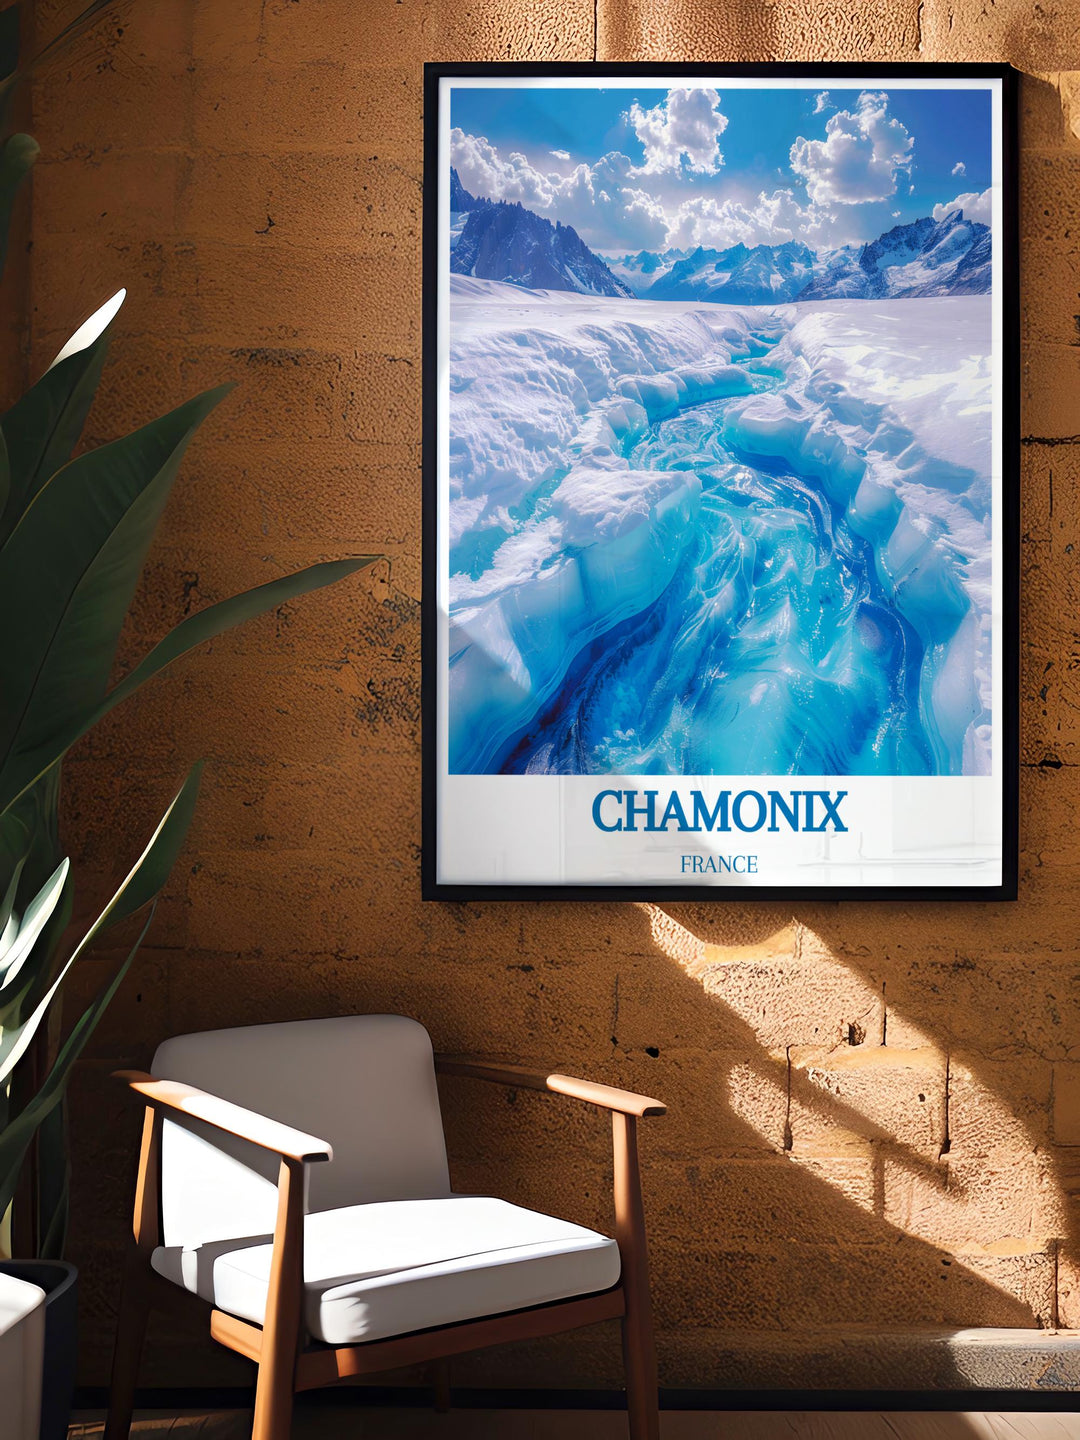  Detailed view of Mer de Glace showing its expansive icy terrain amidst the Chamonix Mont Blanc region, ideal for a travel poster